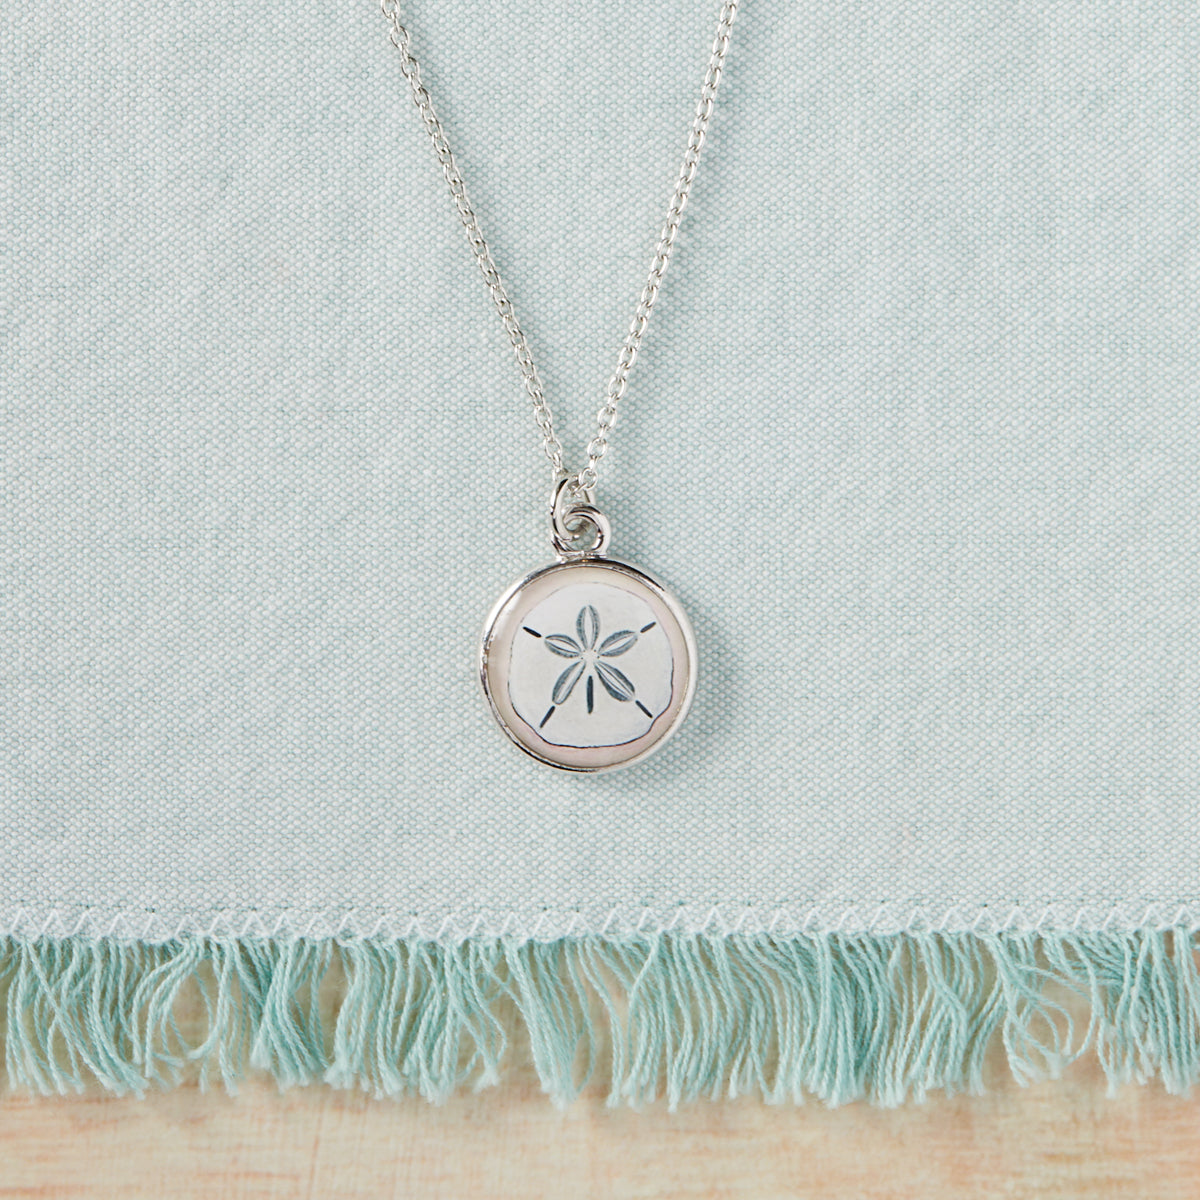 Illustrated Sand Dollar Necklace